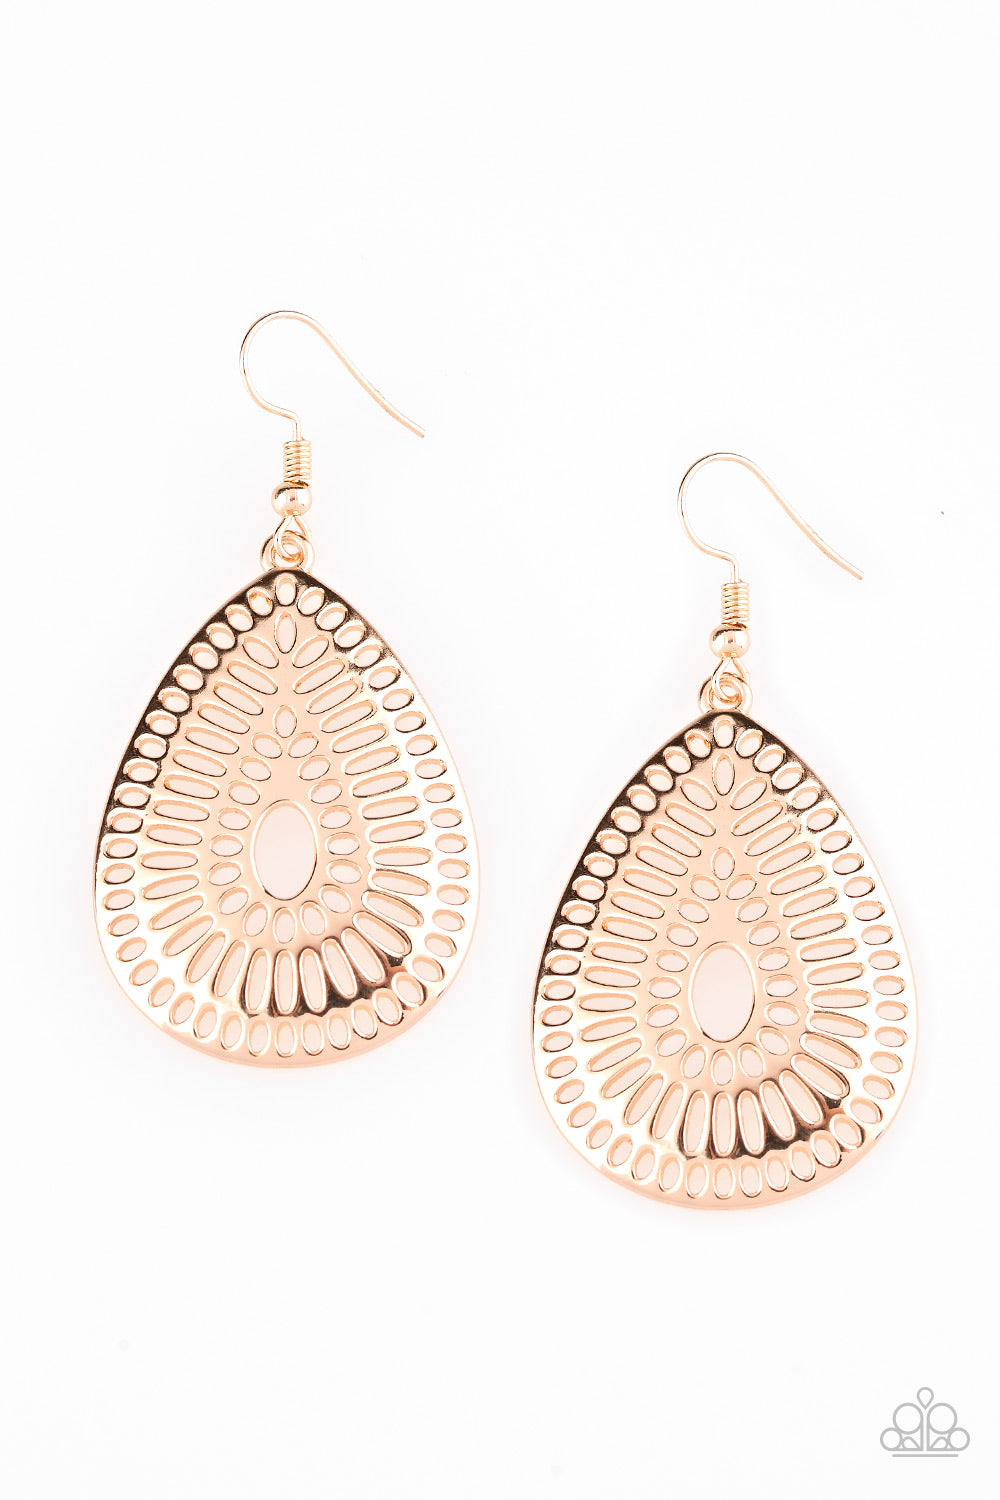 You Look GRATE! Gold Paparazzi Earrings Cashmere Pink Jewels - Cashmere Pink Jewels & Accessories, Cashmere Pink Jewels & Accessories - Paparazzi